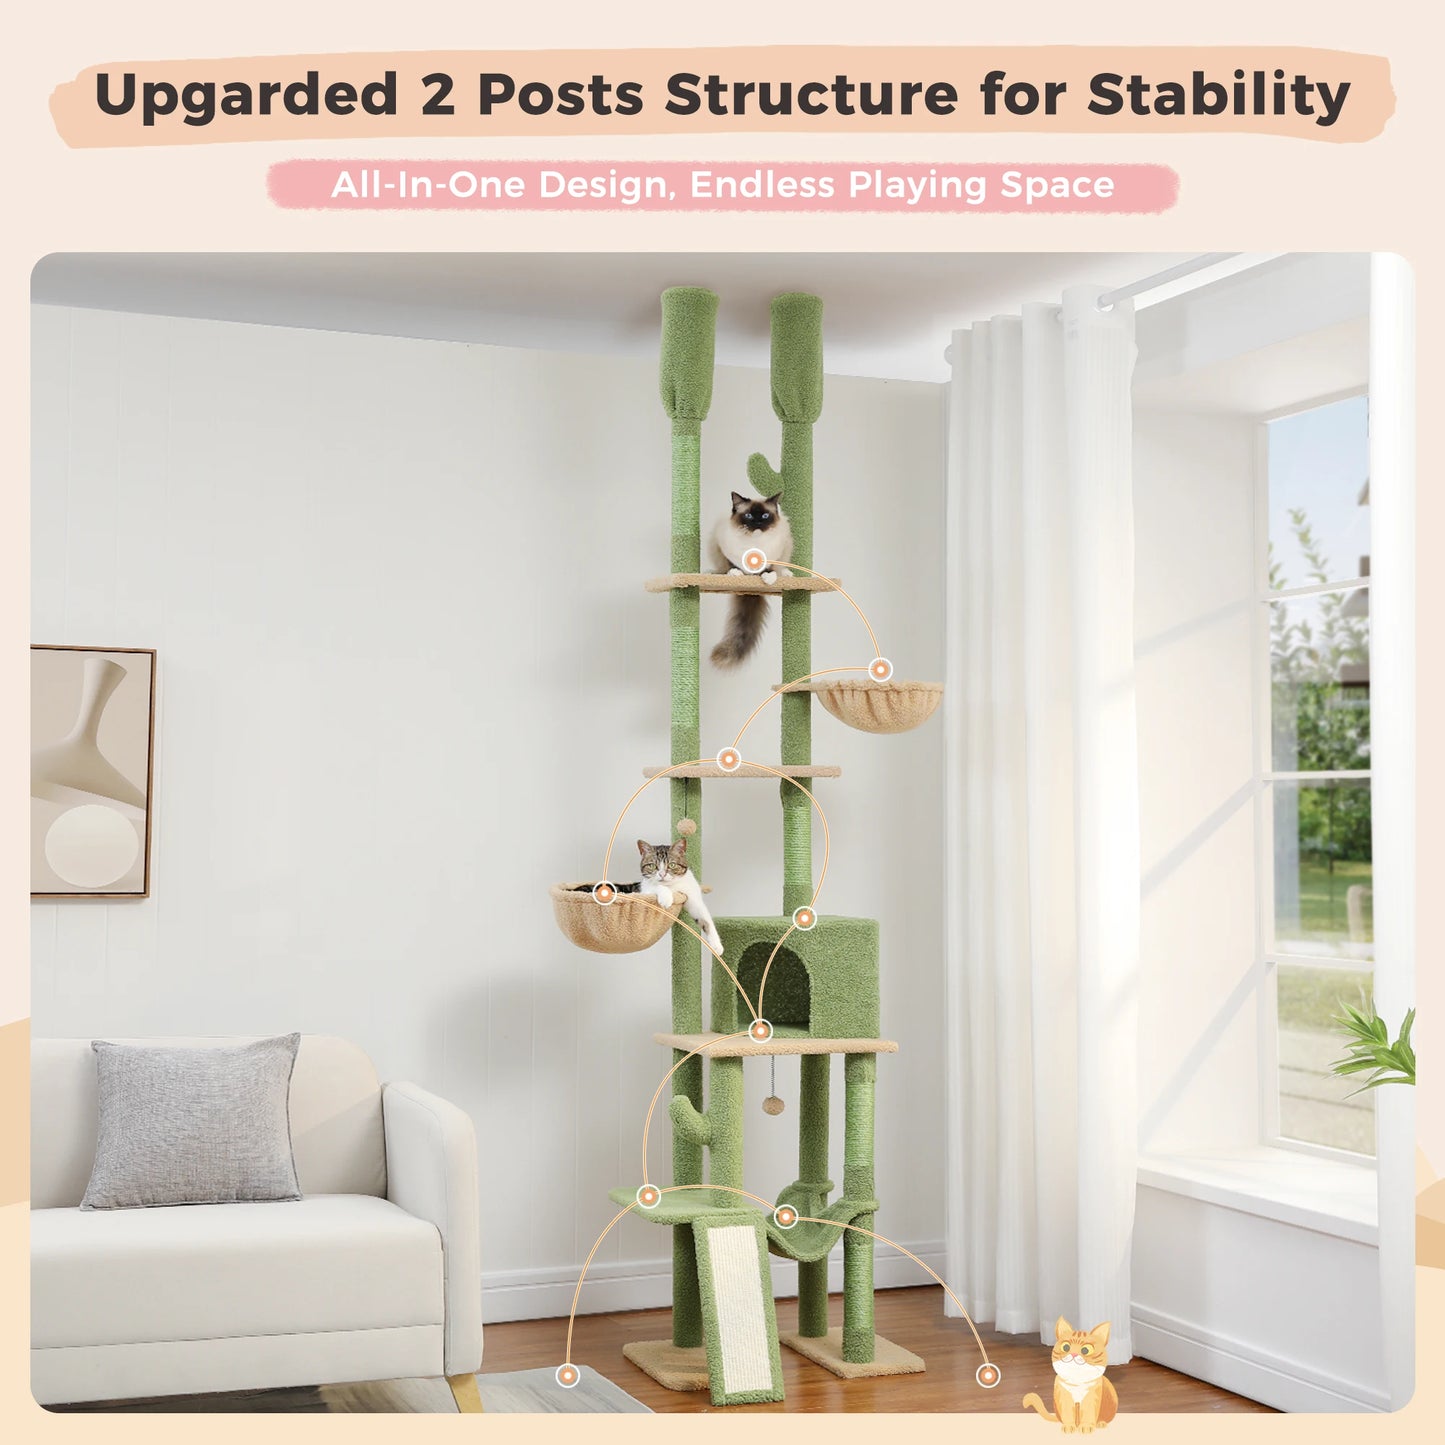 Adjustable 216-285cm Cactus-Themed High Cat Tower with Condo and Hammock